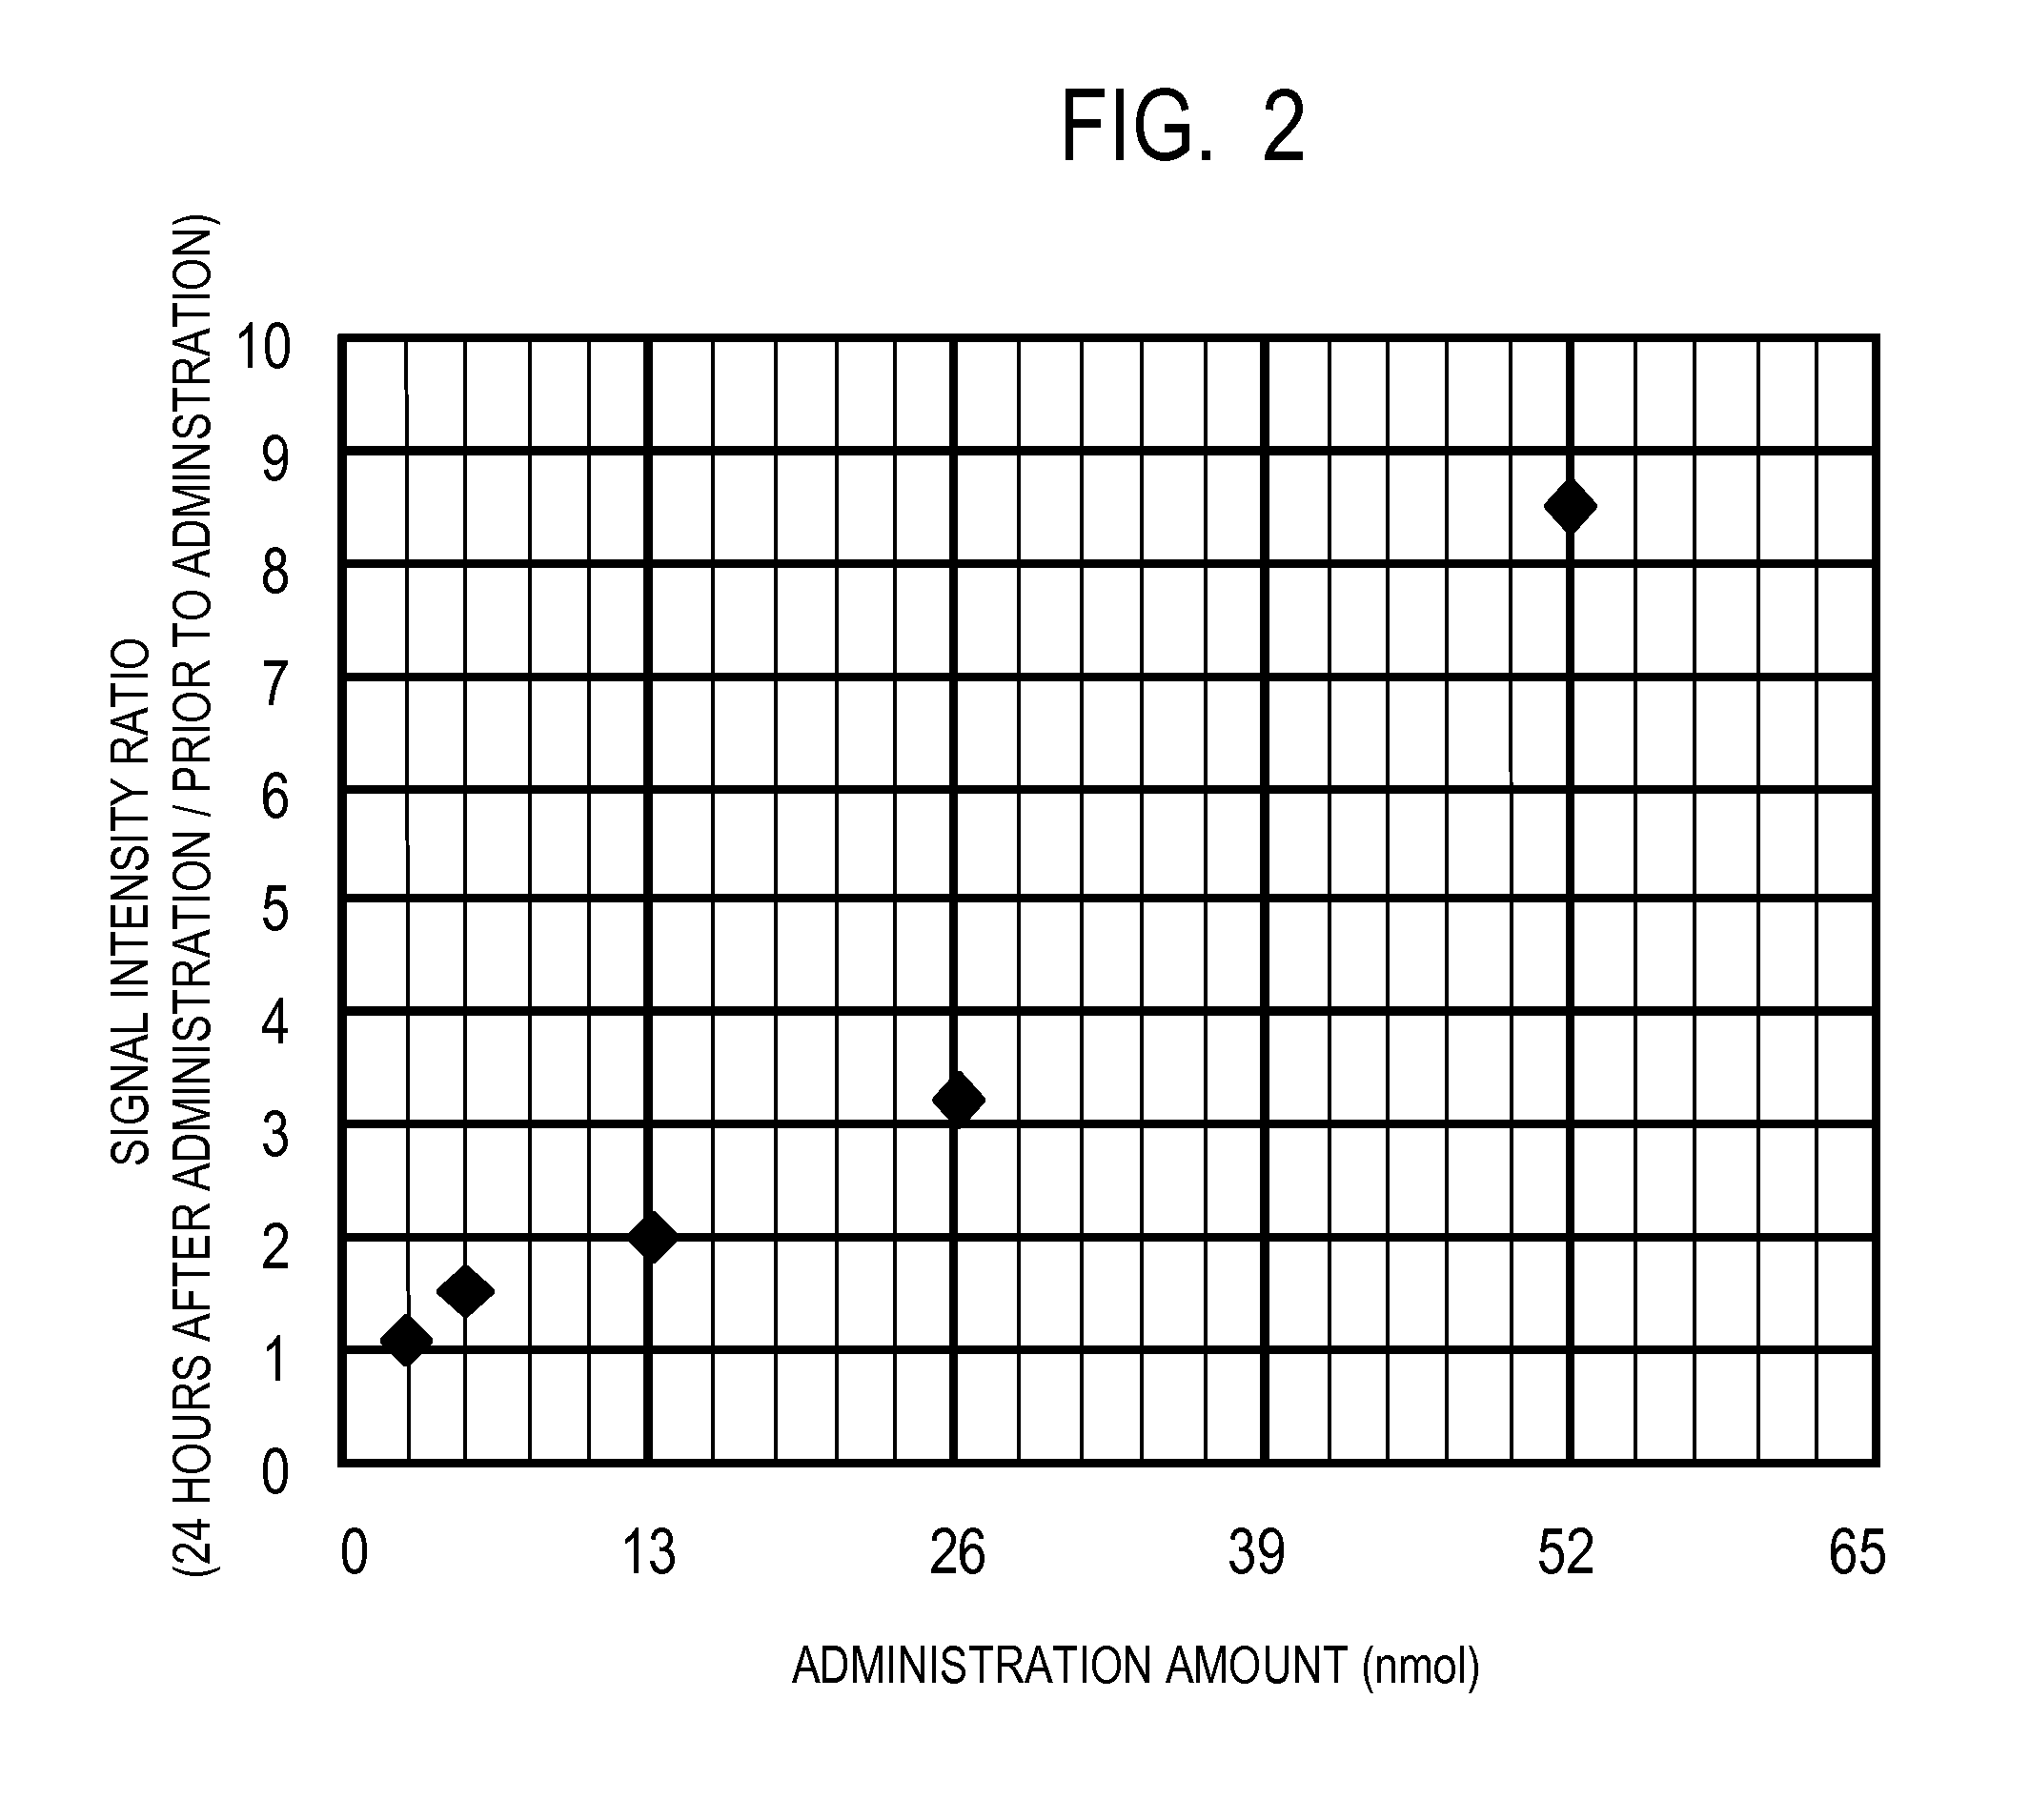 Dye-containing nanoparticle for photoacoustic contrast agent